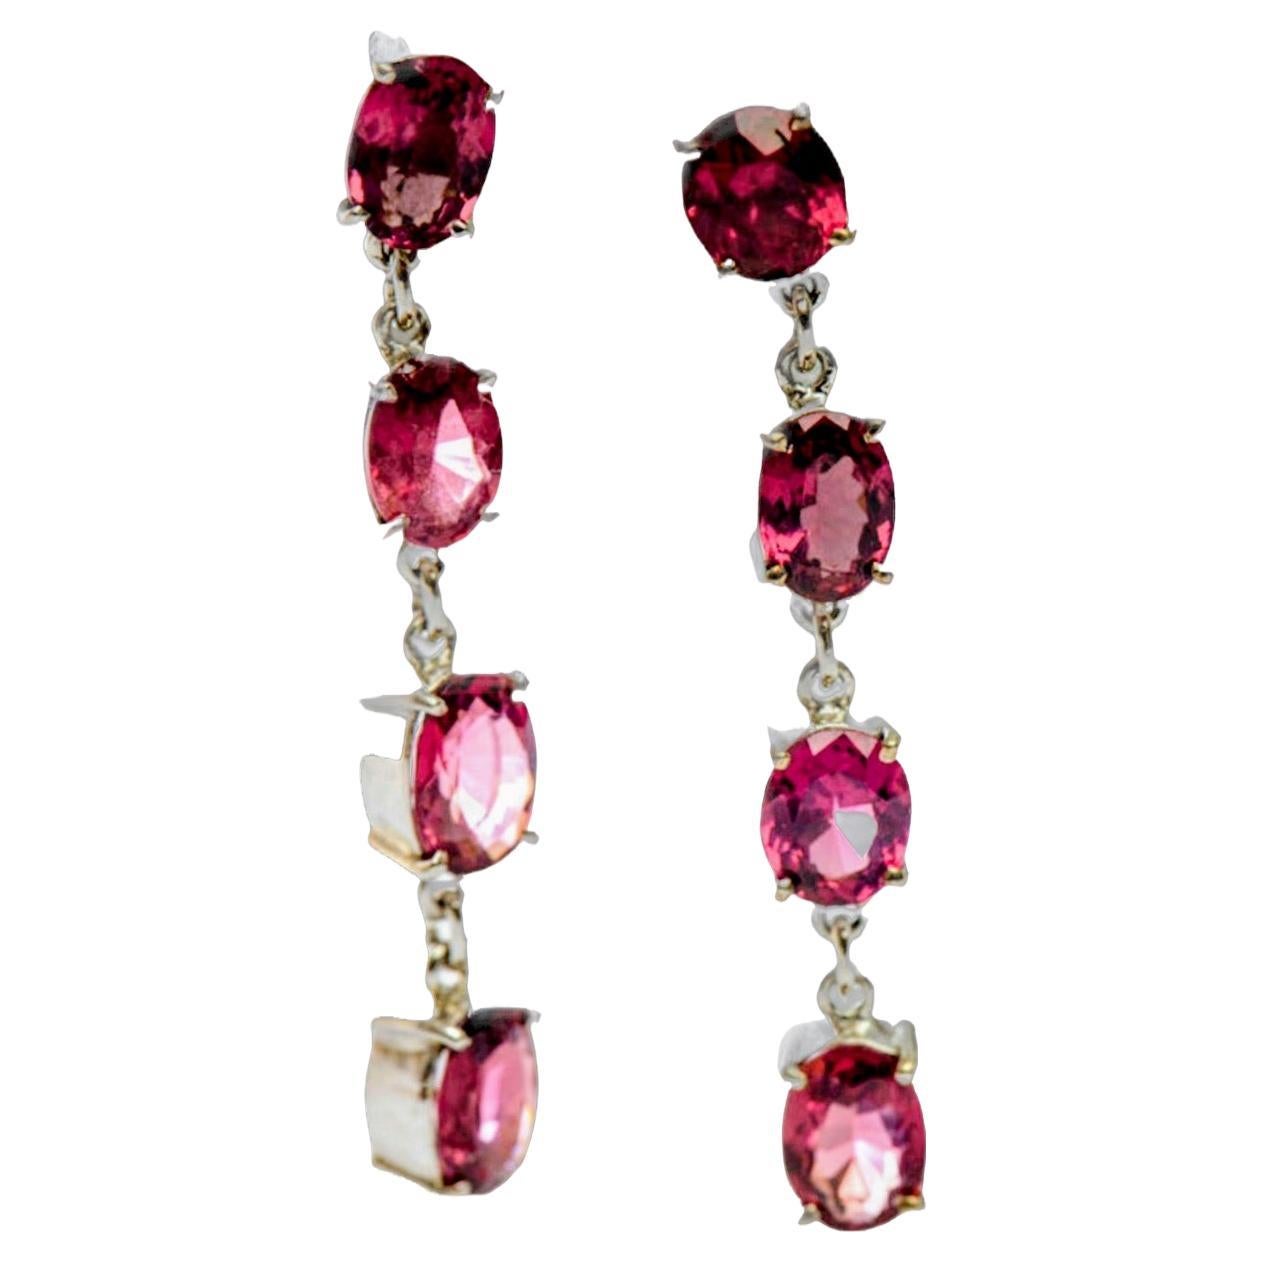 8ct Oval Natural Red Garnet Pin Dangle Earrings For Sale